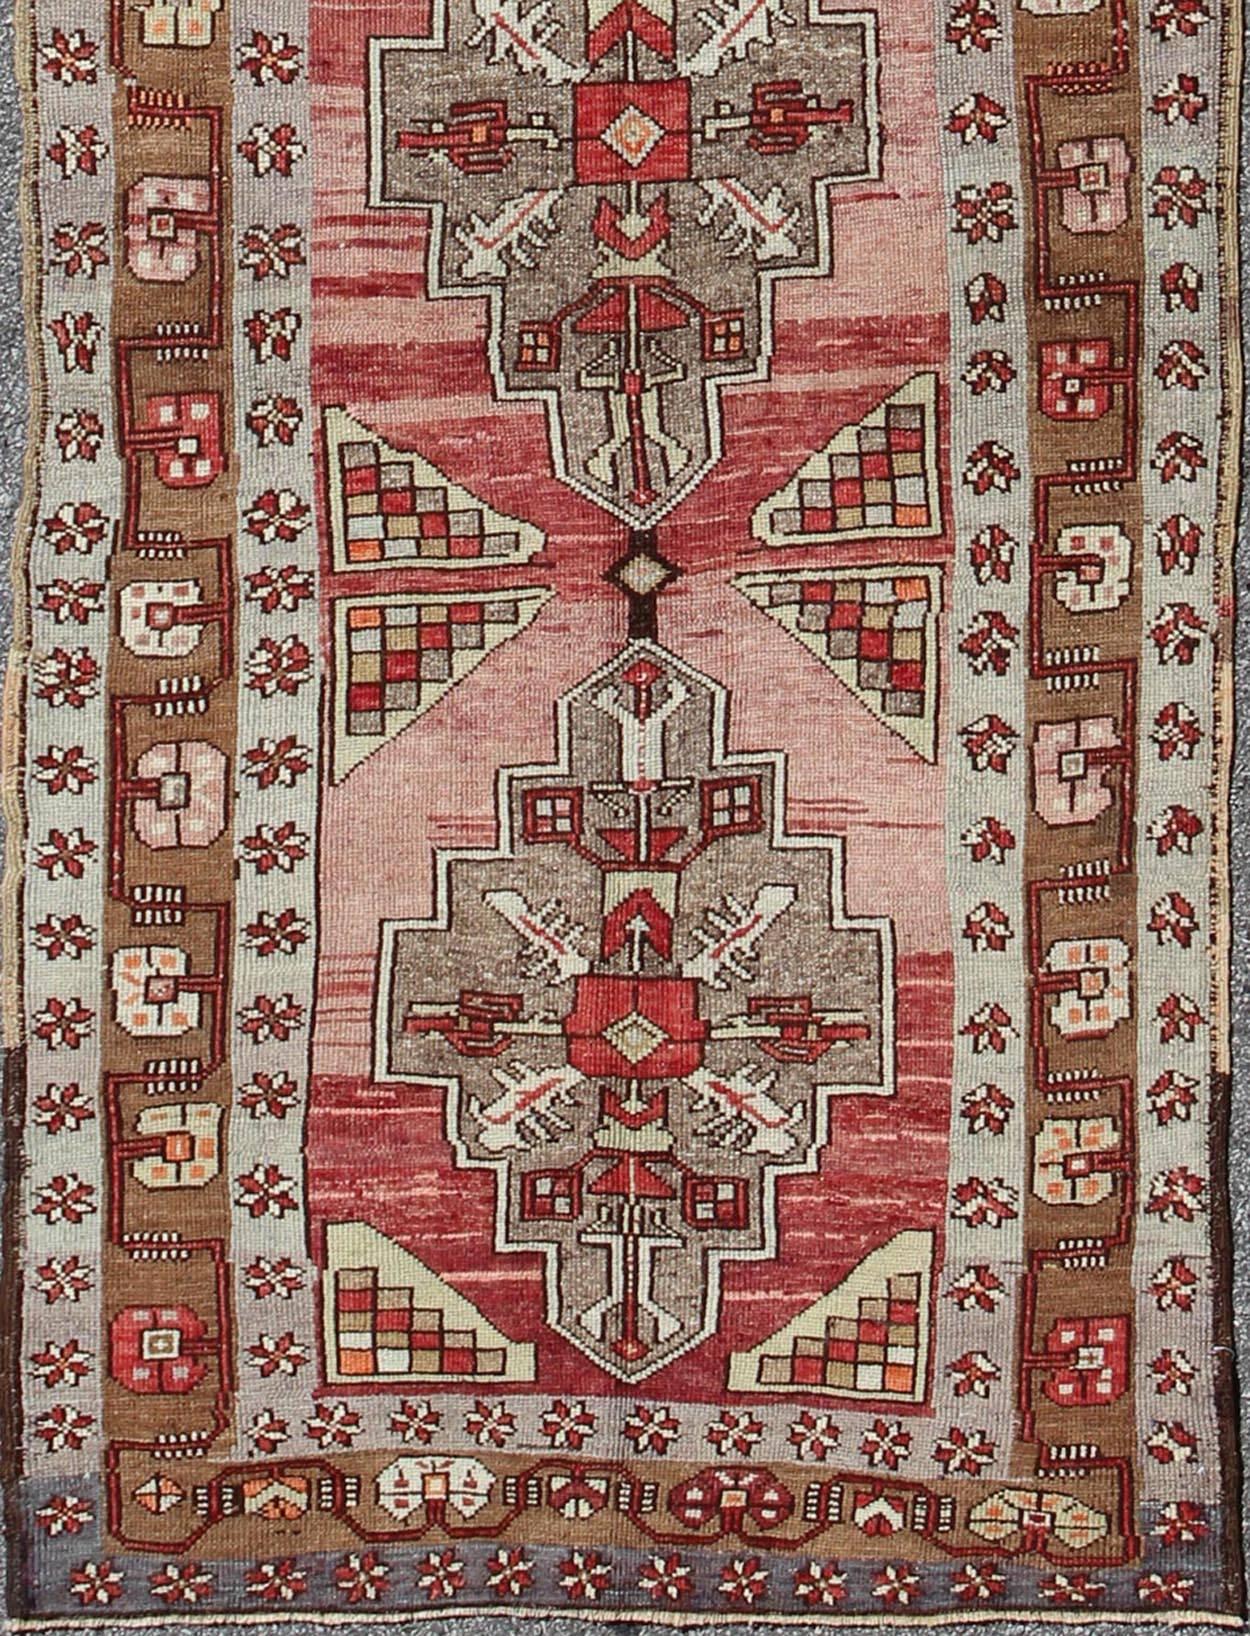 Measures: 4'2 x 14'0.
This vintage Oushak runner contains a unique blend of cheerful colors and an intricately beautiful design. The multi-layered diamond medallions are complemented by a symmetrical set of floral motifs. The various shades of teal,